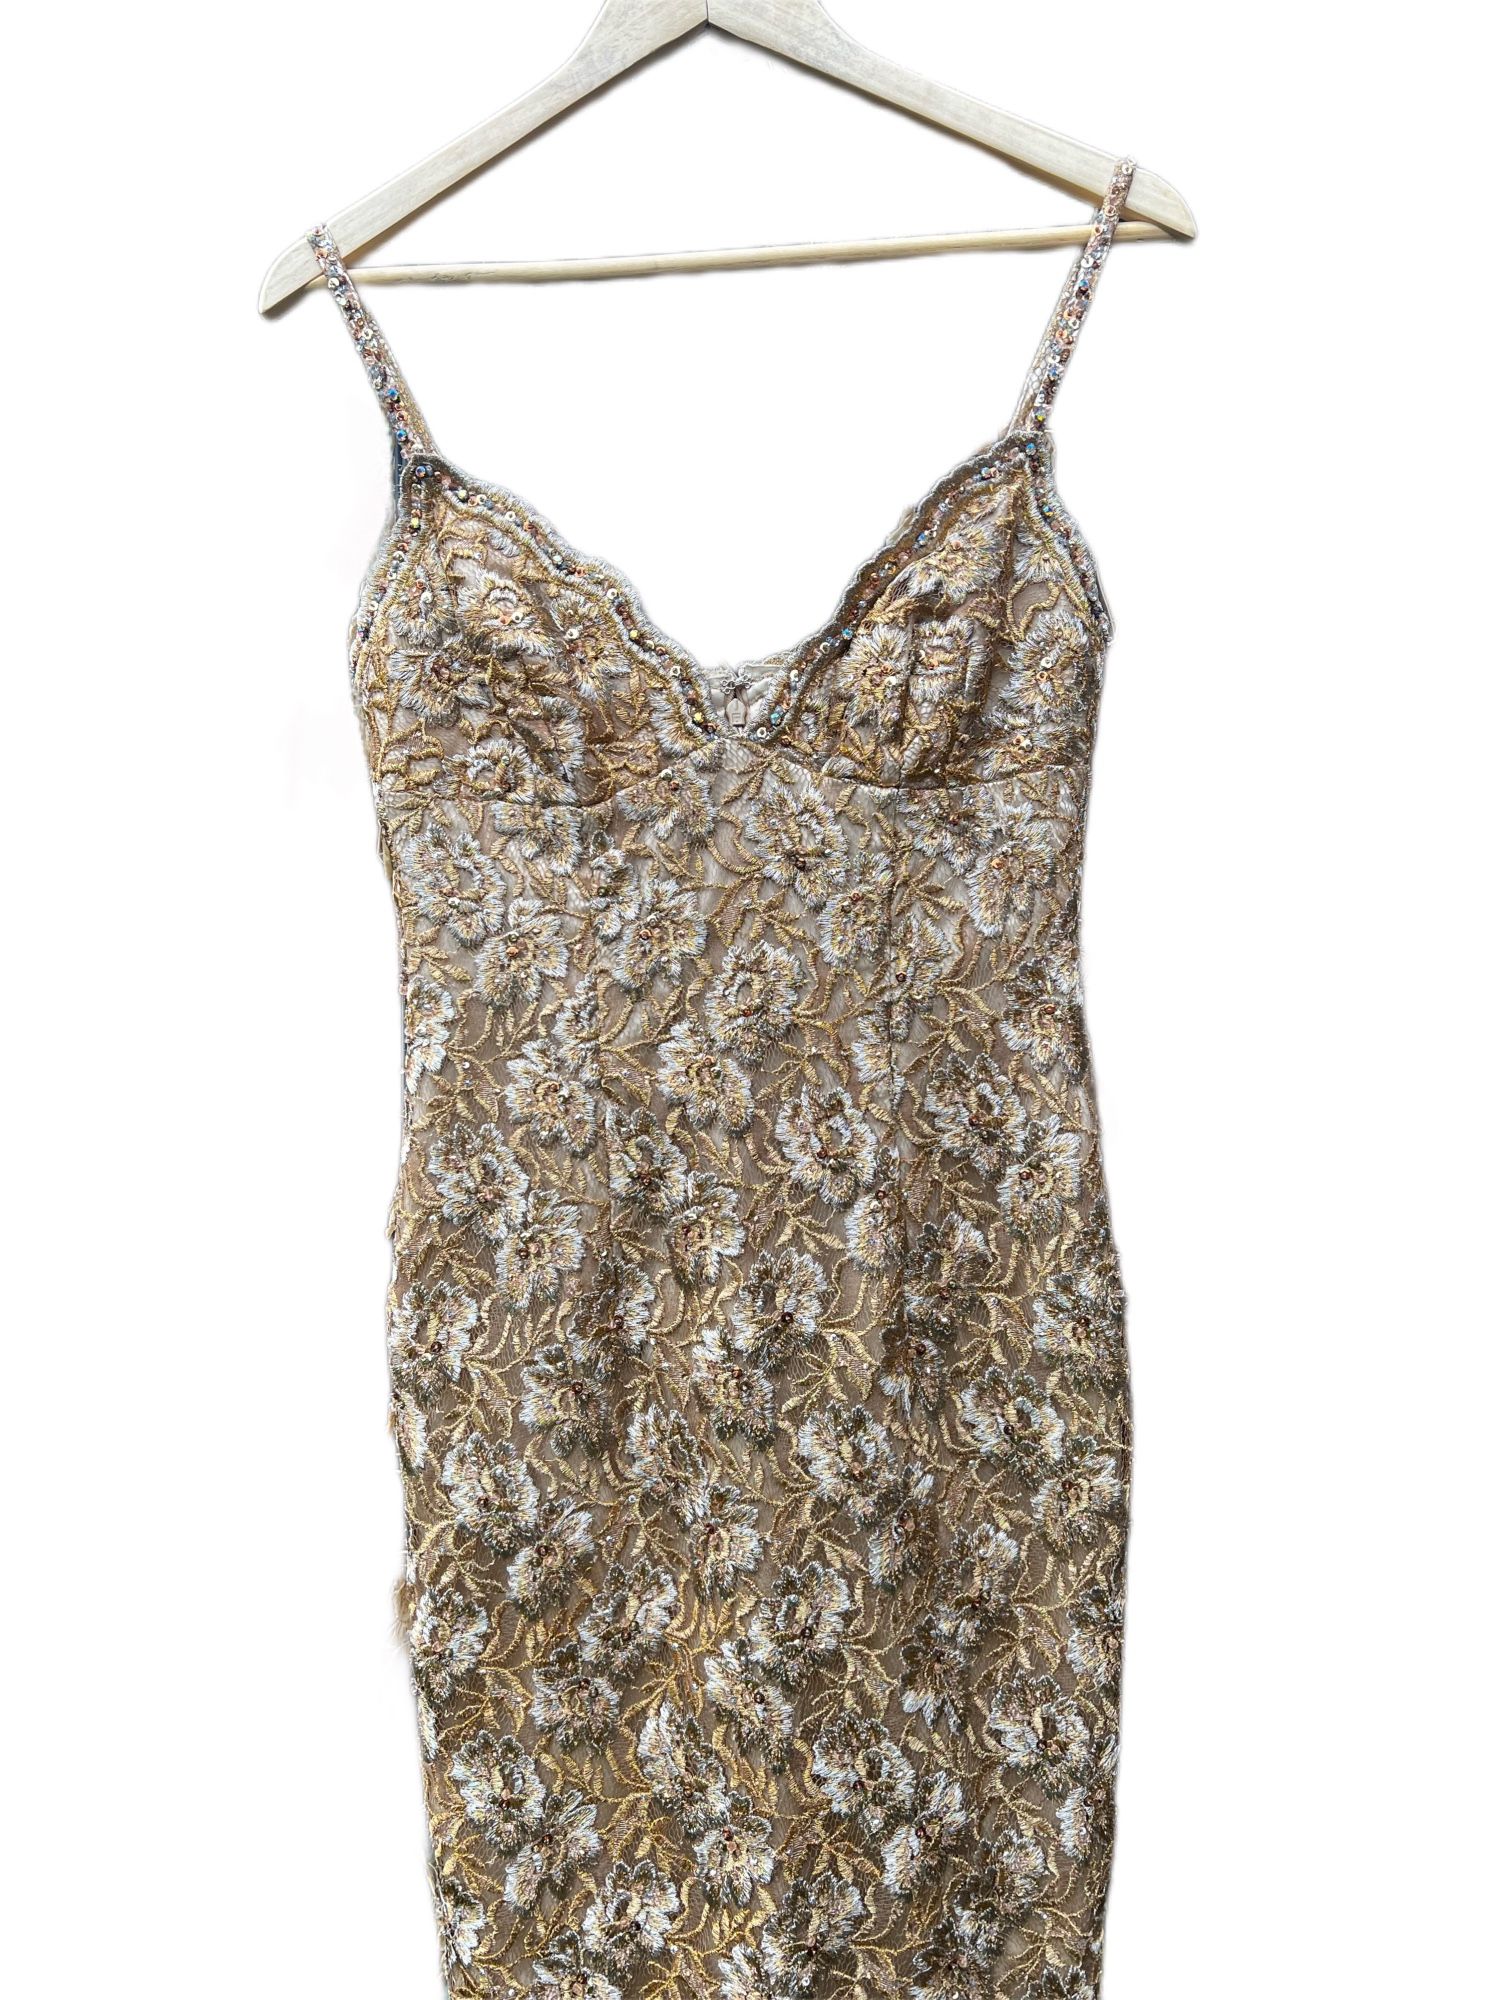 Mandalay gold embroidered mesh w/ sequin and Swarovski crystal accents dress 6  New cocktail dress with tags.  Extra crystal and beading along bottom 